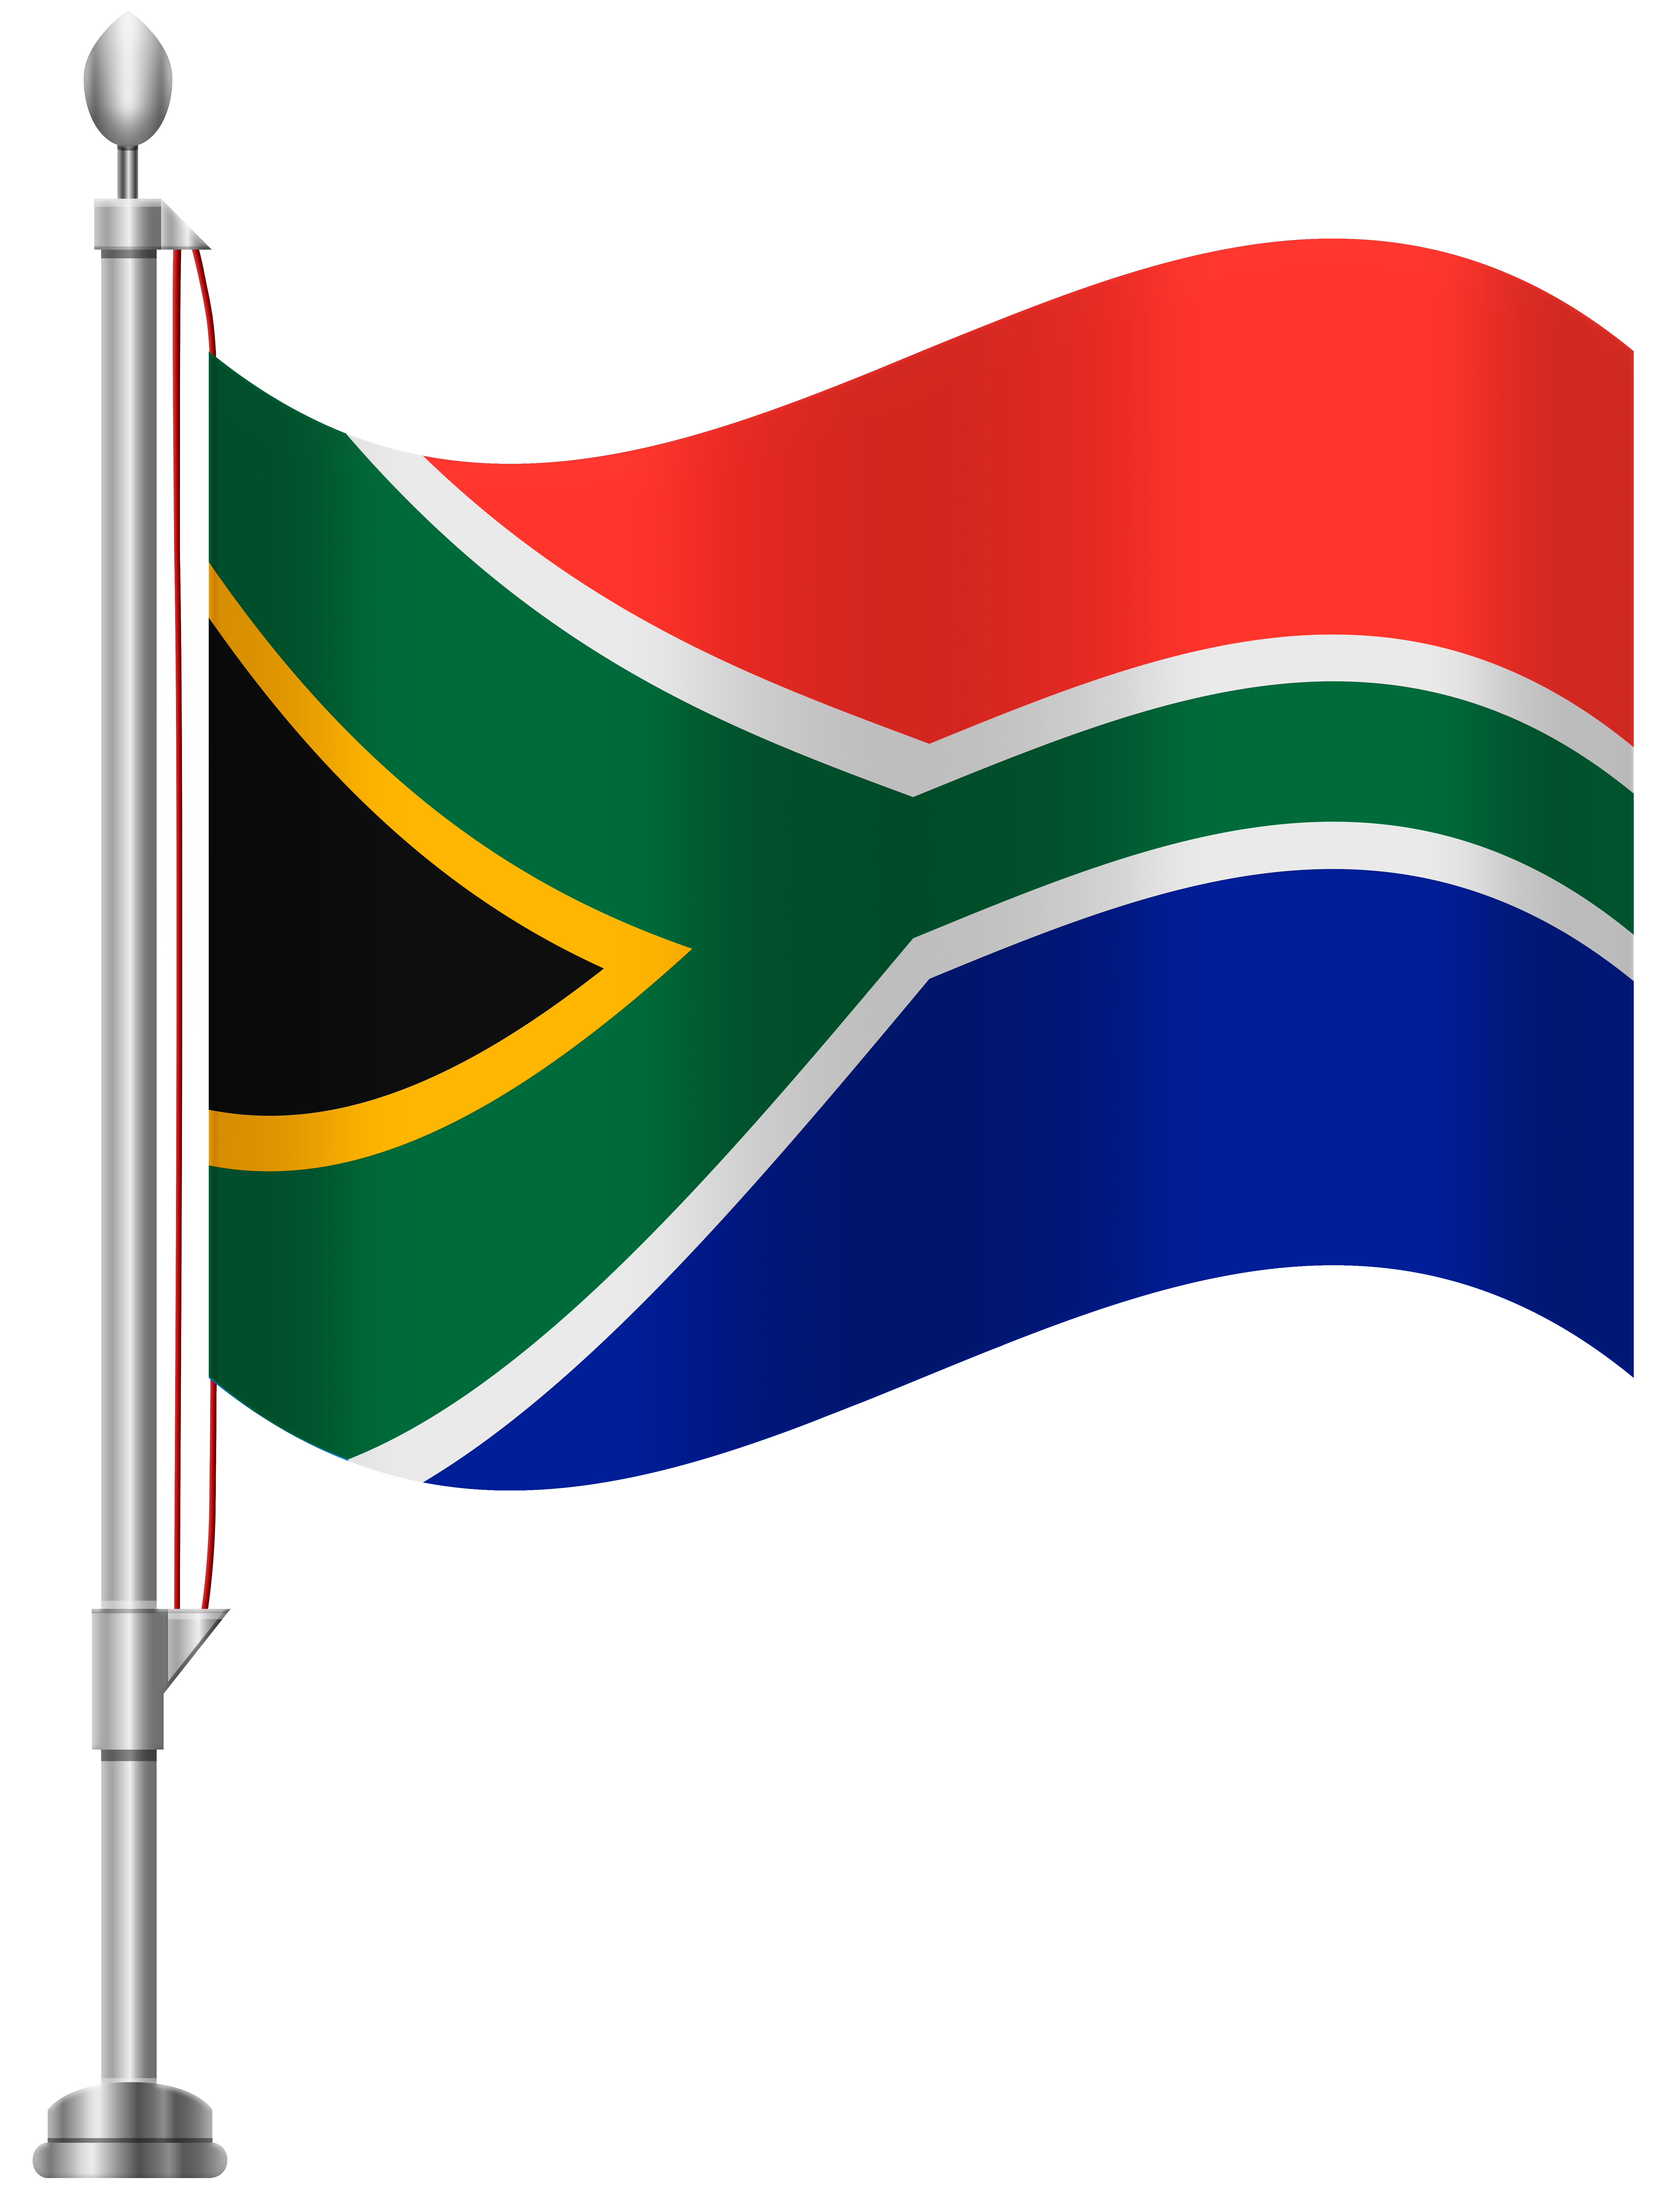 south africa clip art free - photo #10